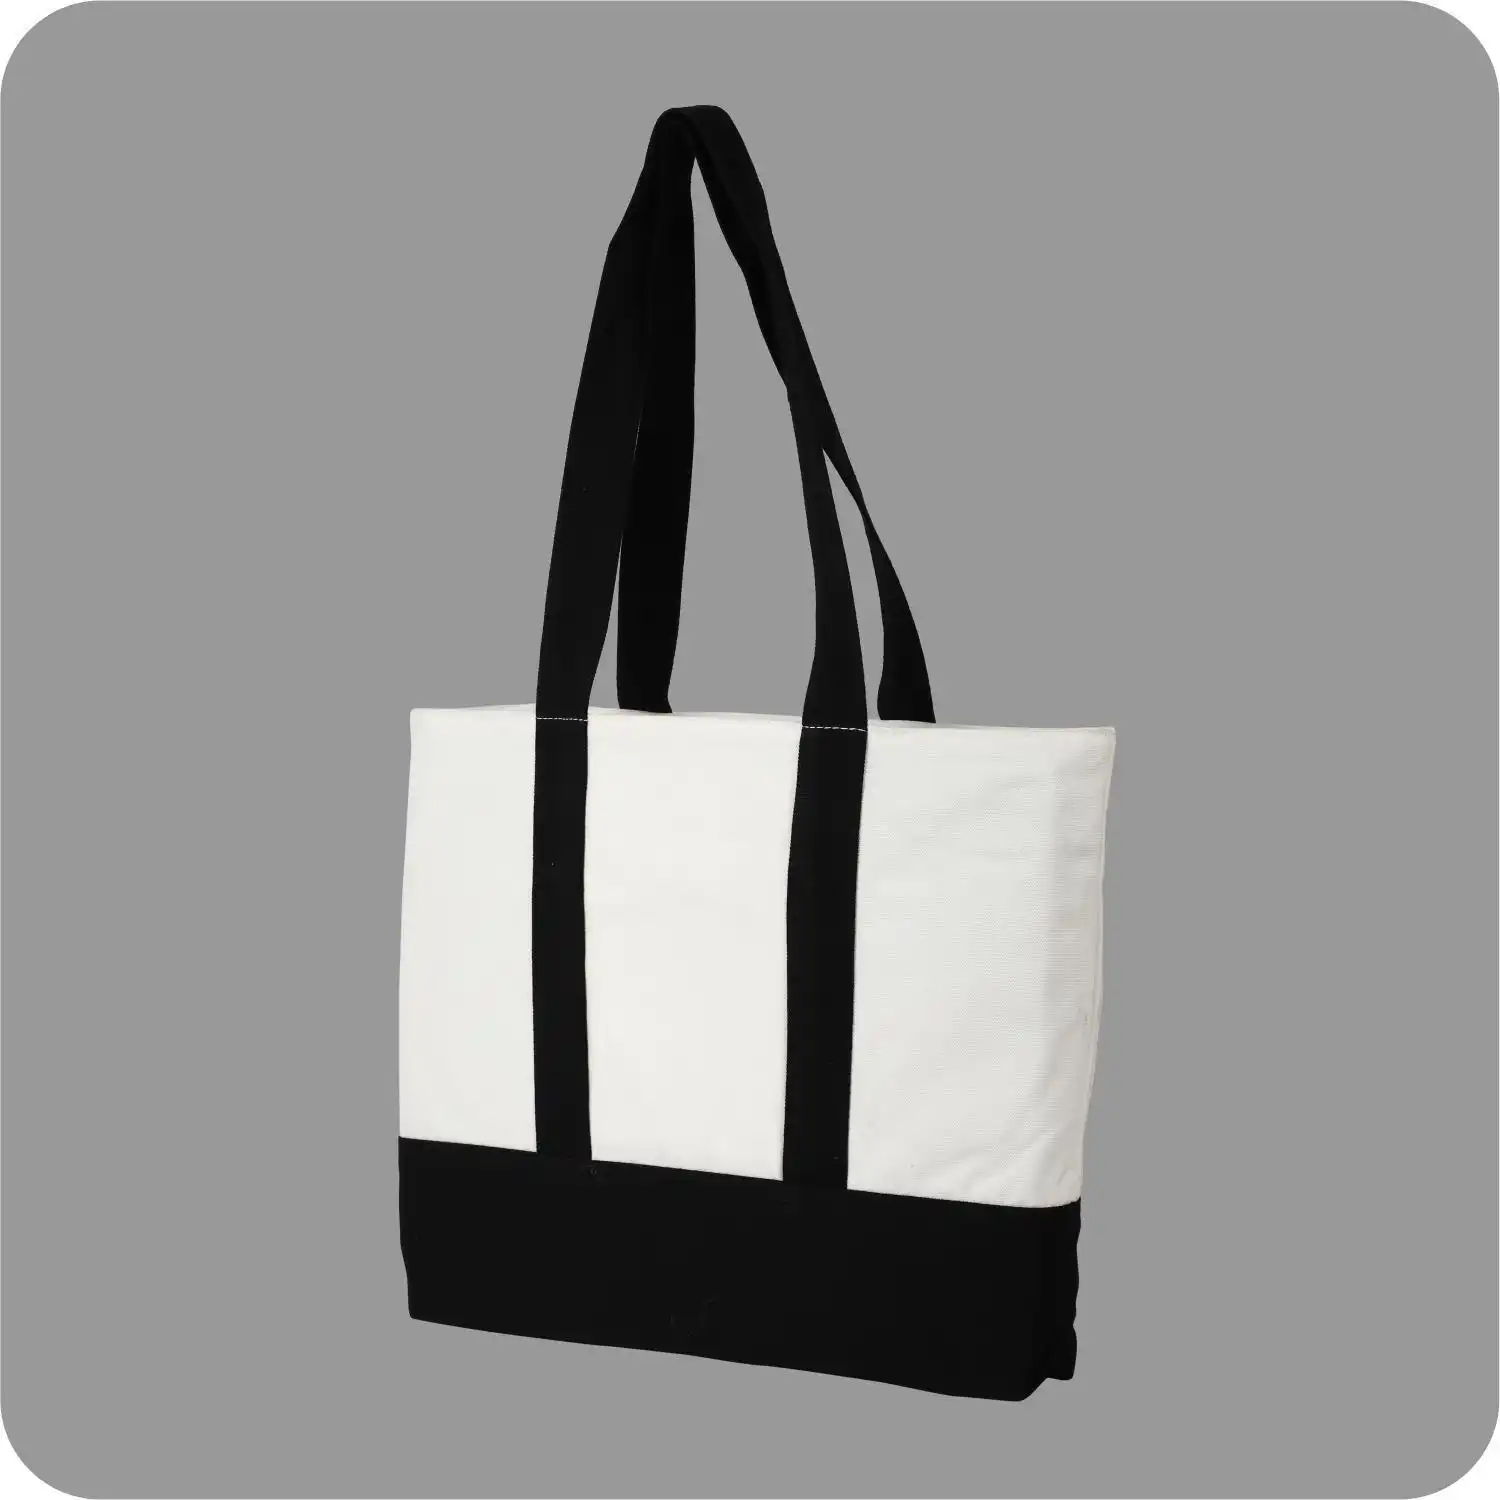 Trendy and Consistent, Heavily Loaded Canvas Bags